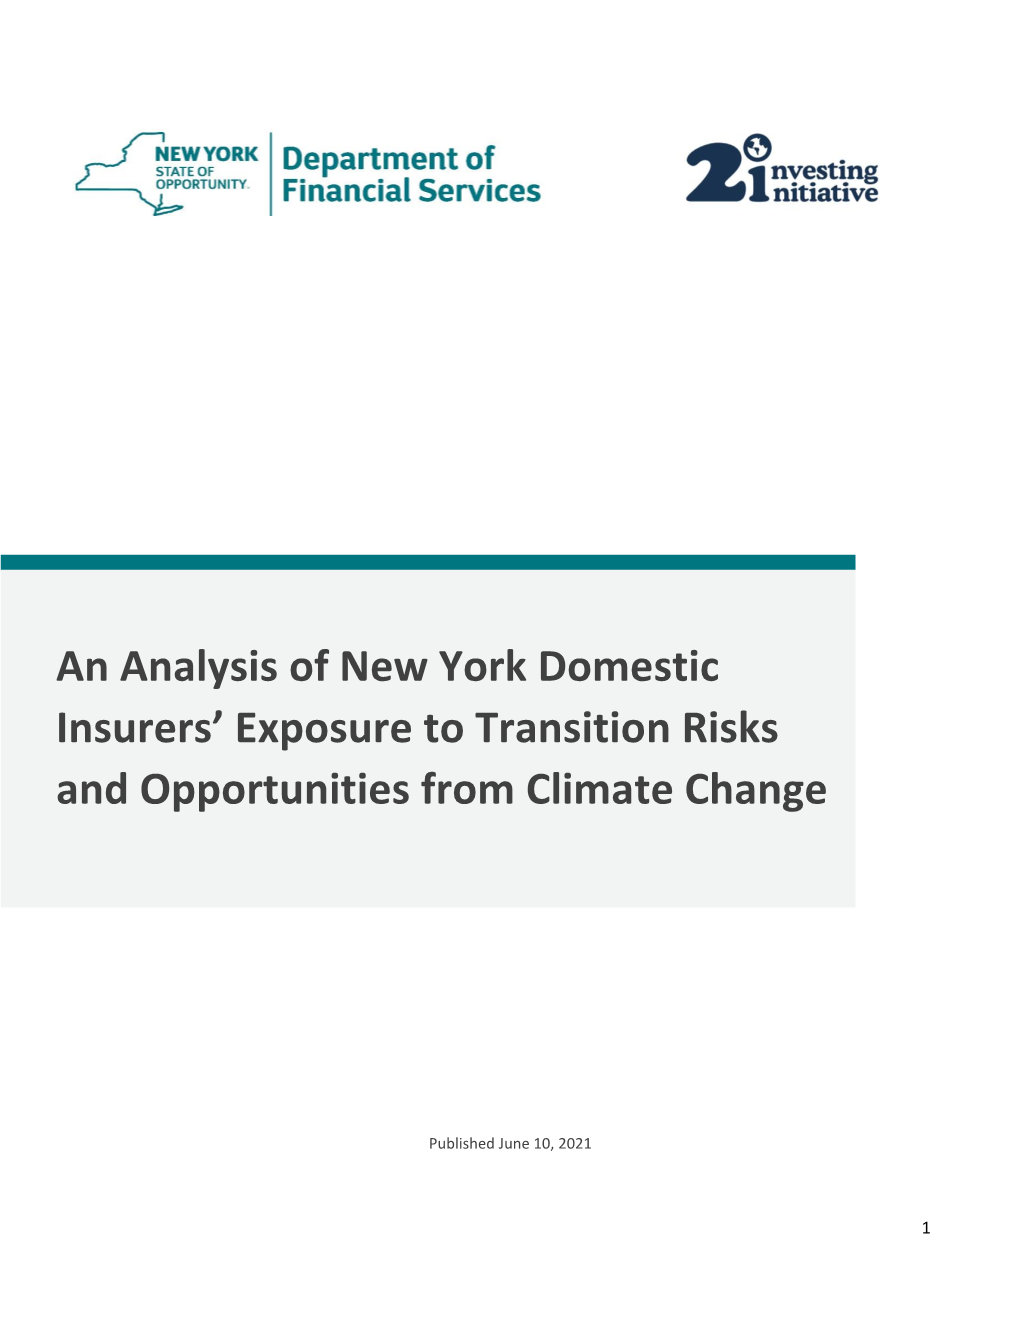 An Analysis of New York Domestic Insurers' Exposure to Transition